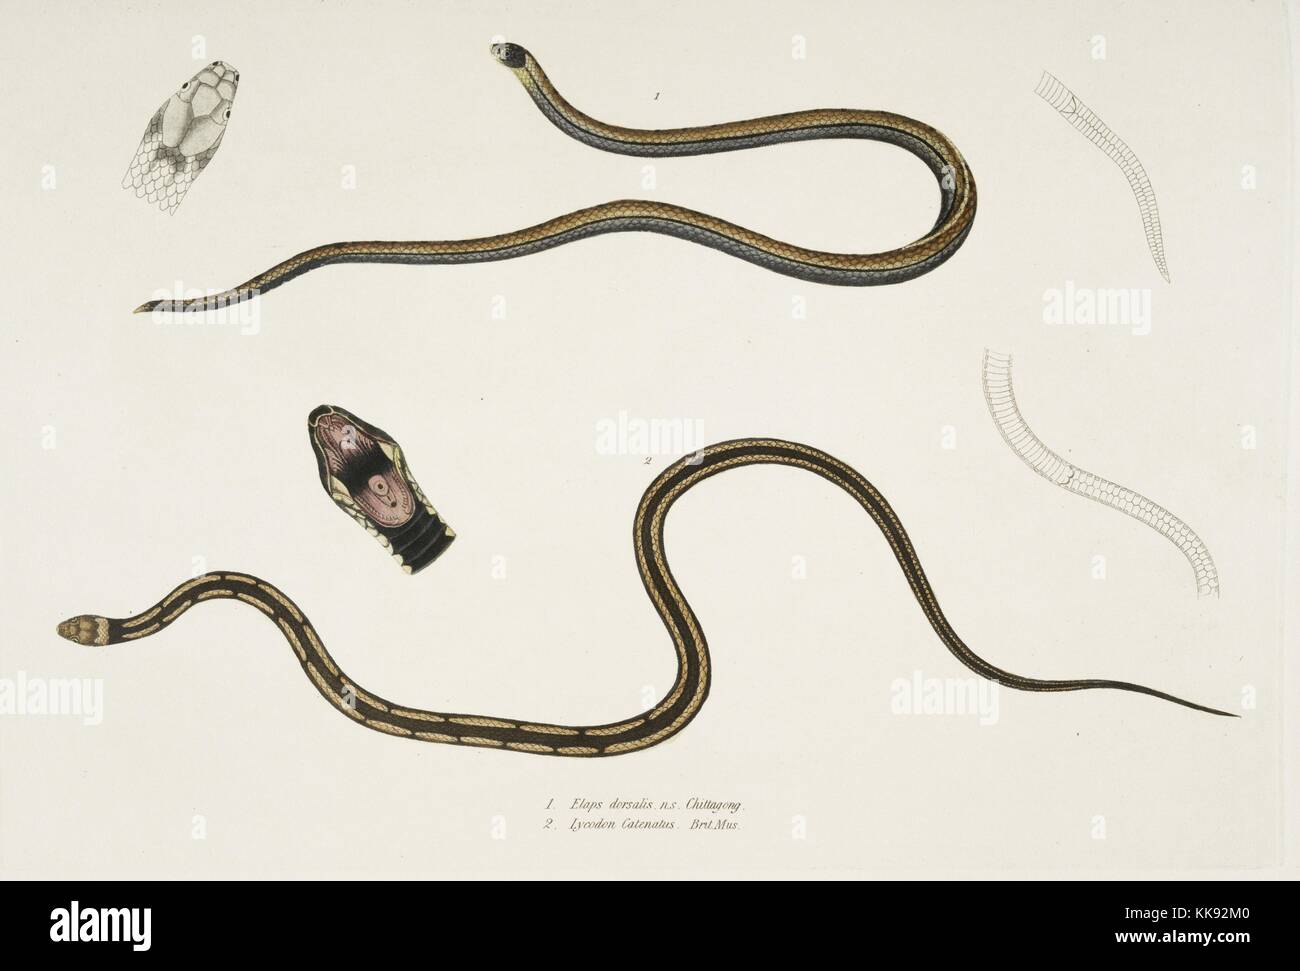 Hand colored print depicting two snakes, at the top a Lined Backed Elaps (Elaps dorsalis), and at the bottom a Chain Spotted Lycodon (Lycodon catenatus), details of head and open mouth, from the book 'Illustrations of Indian Zoology, Chiefly from the Collection of Major General Hardwicke', 1832. From the New York Public Library. Stock Photo